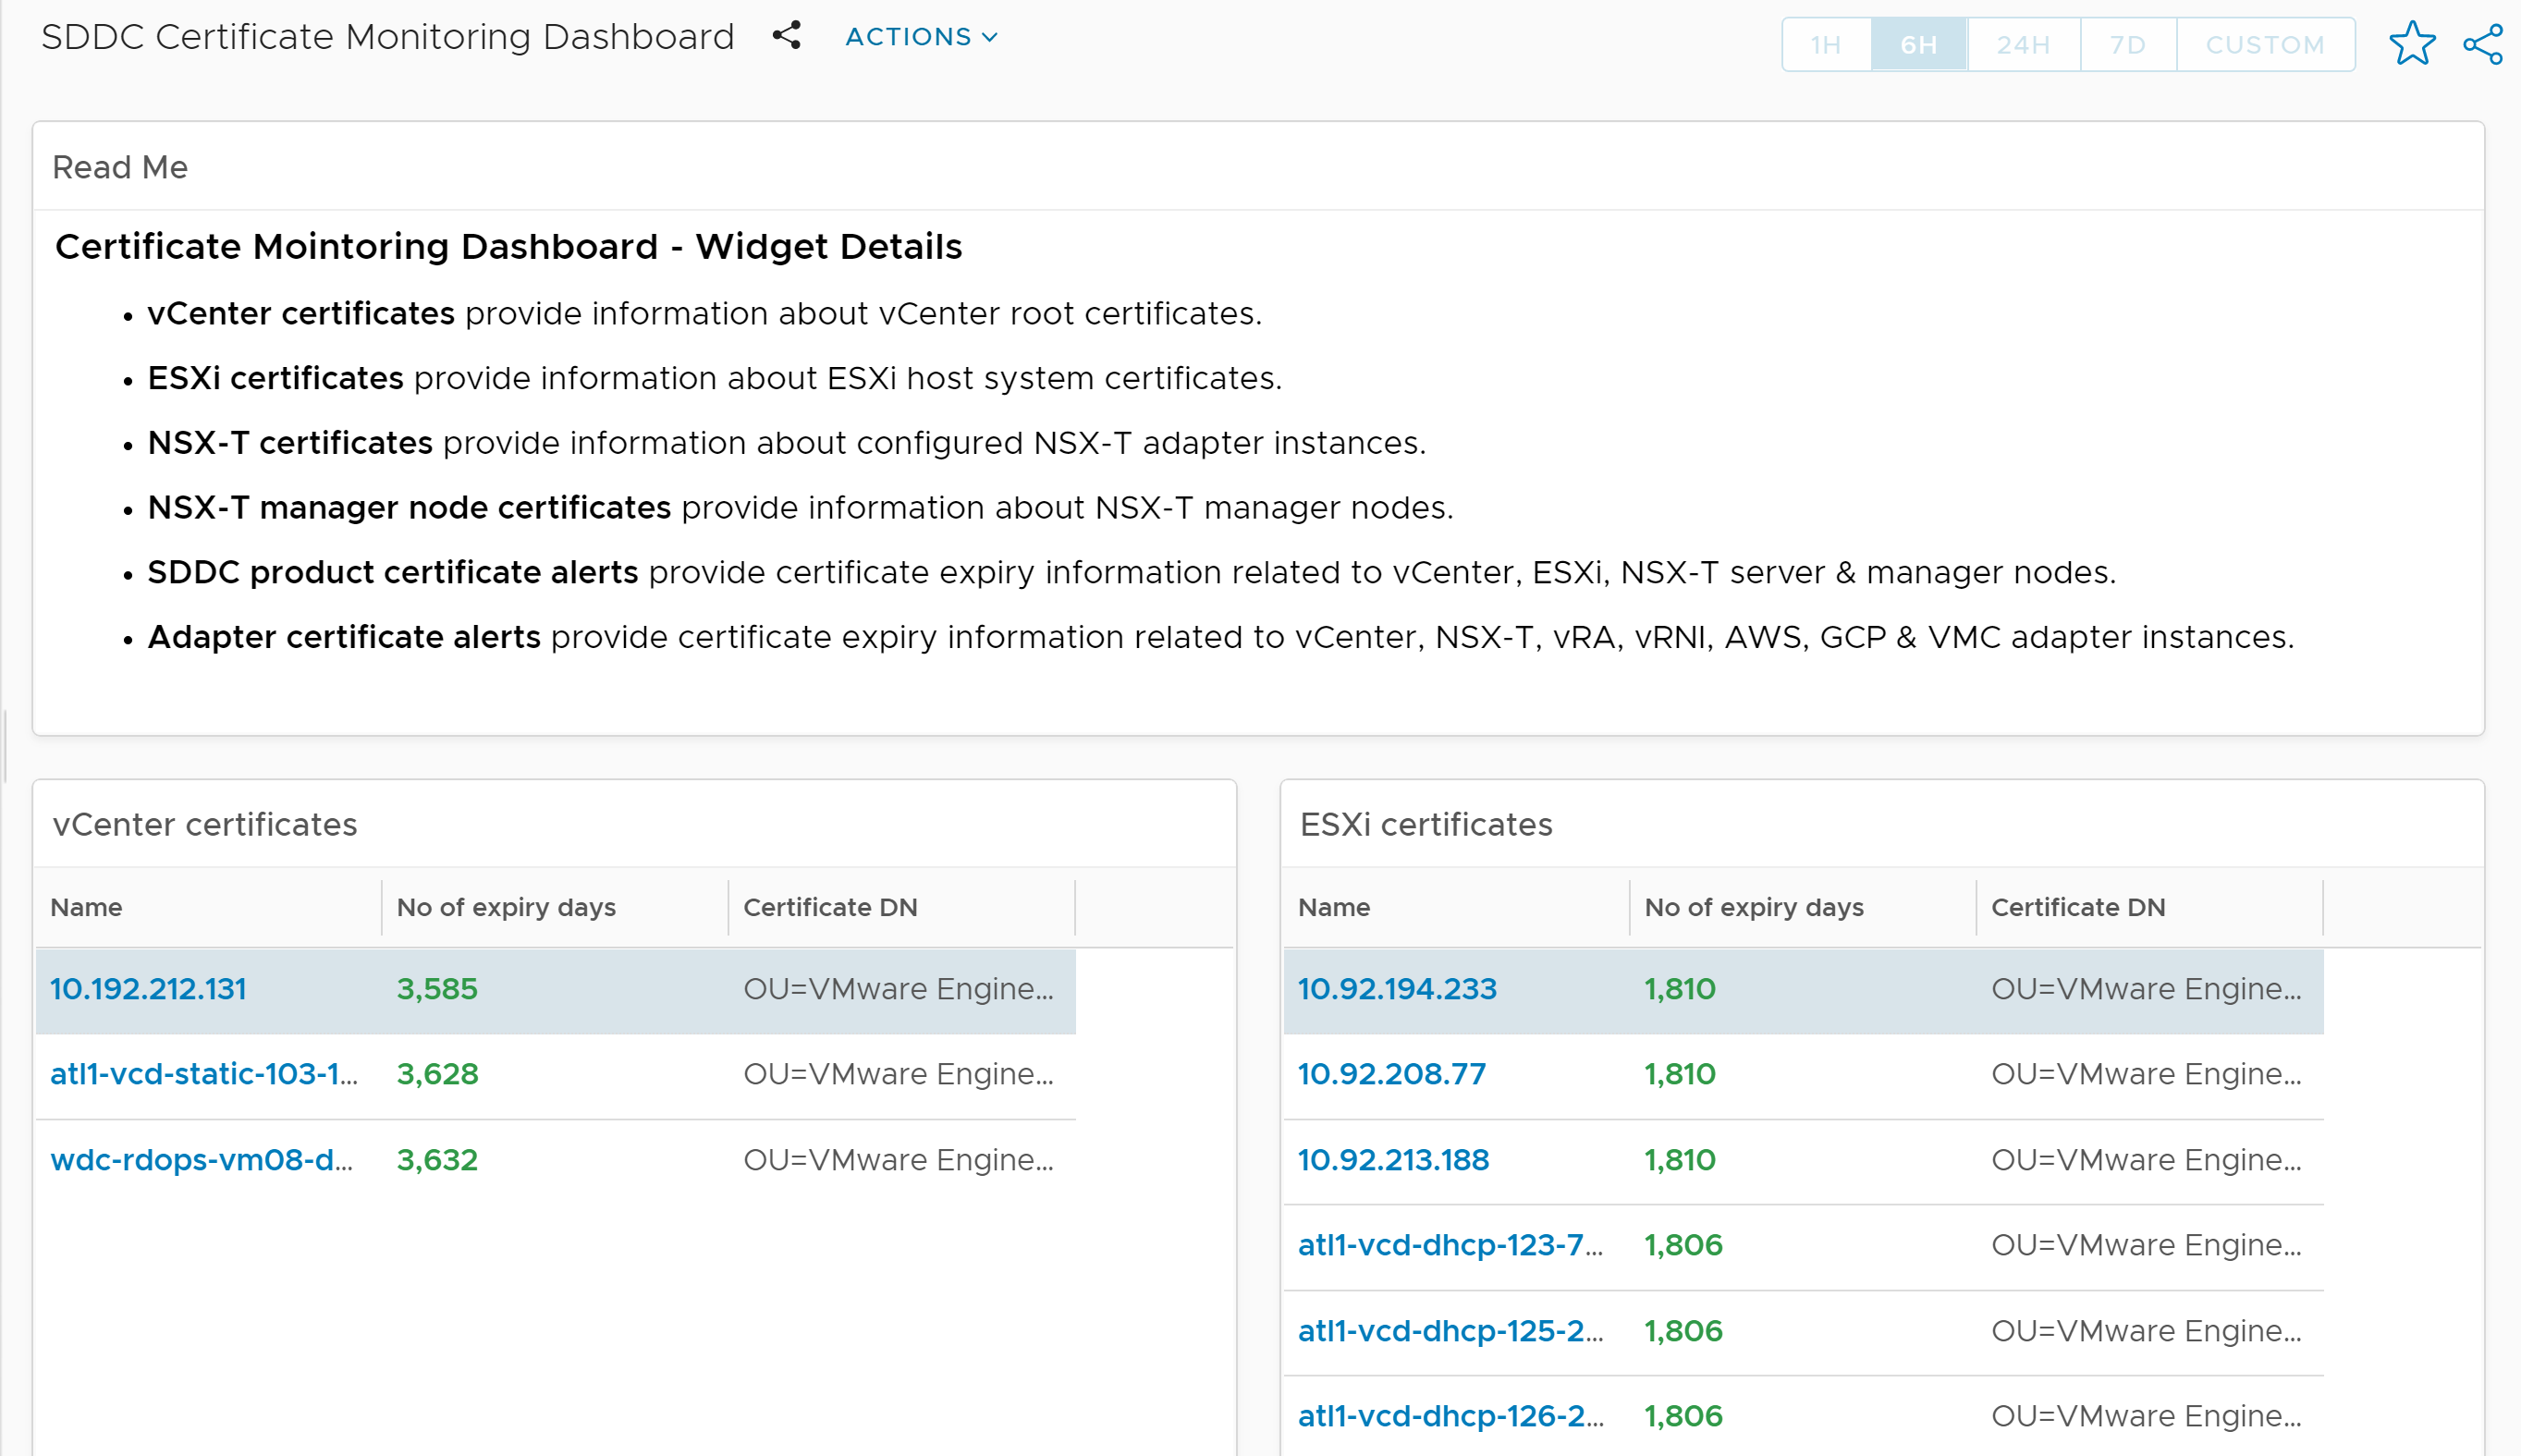 This image shows the SDDC Certificate for vCenter, ESXi, NSX-T